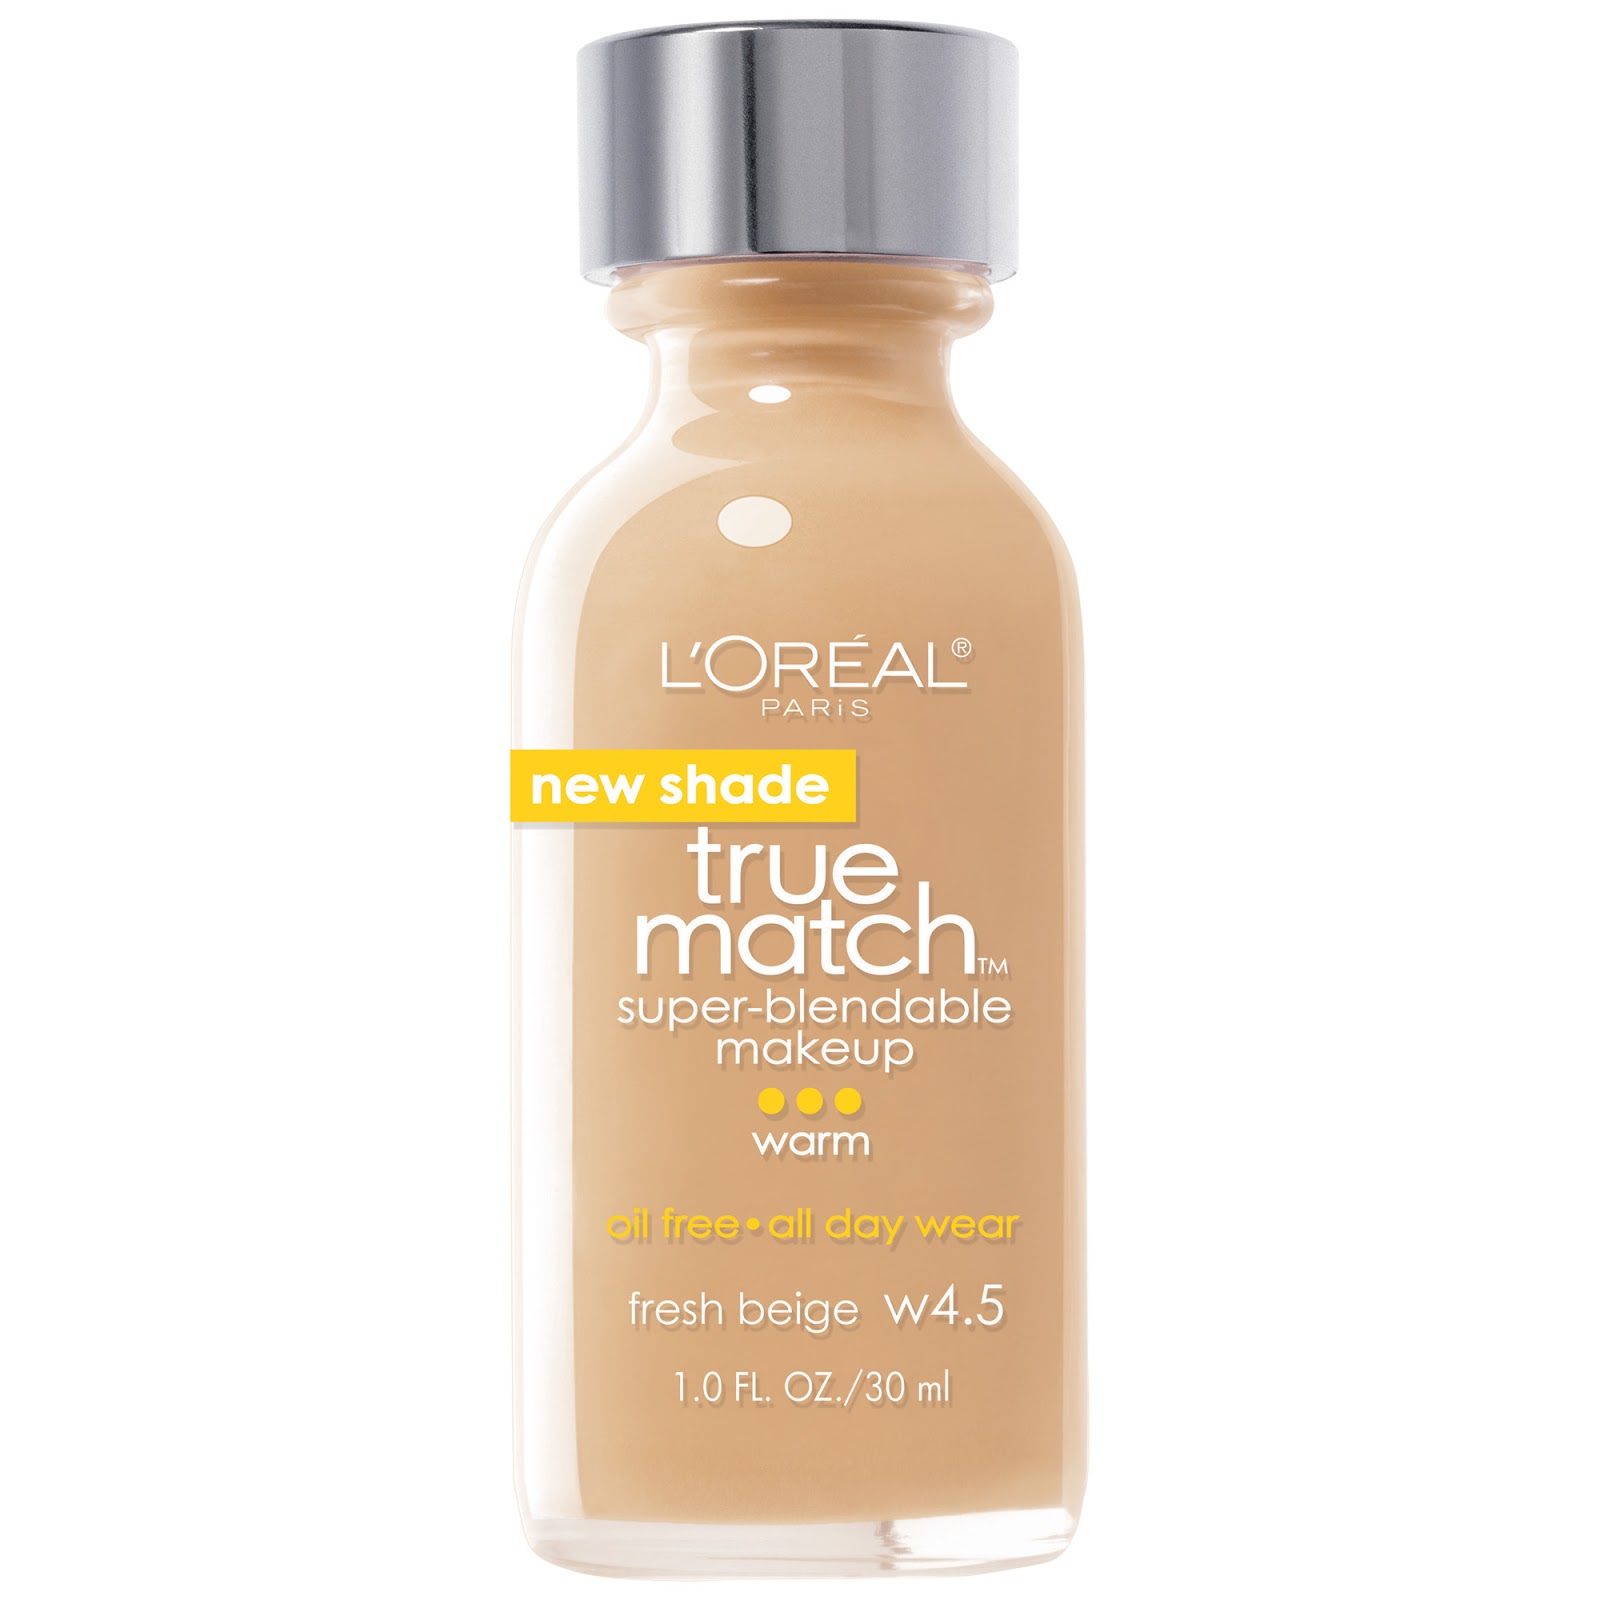 L’Oreal True Match Foundation Review & Swatches | FS Fashionista